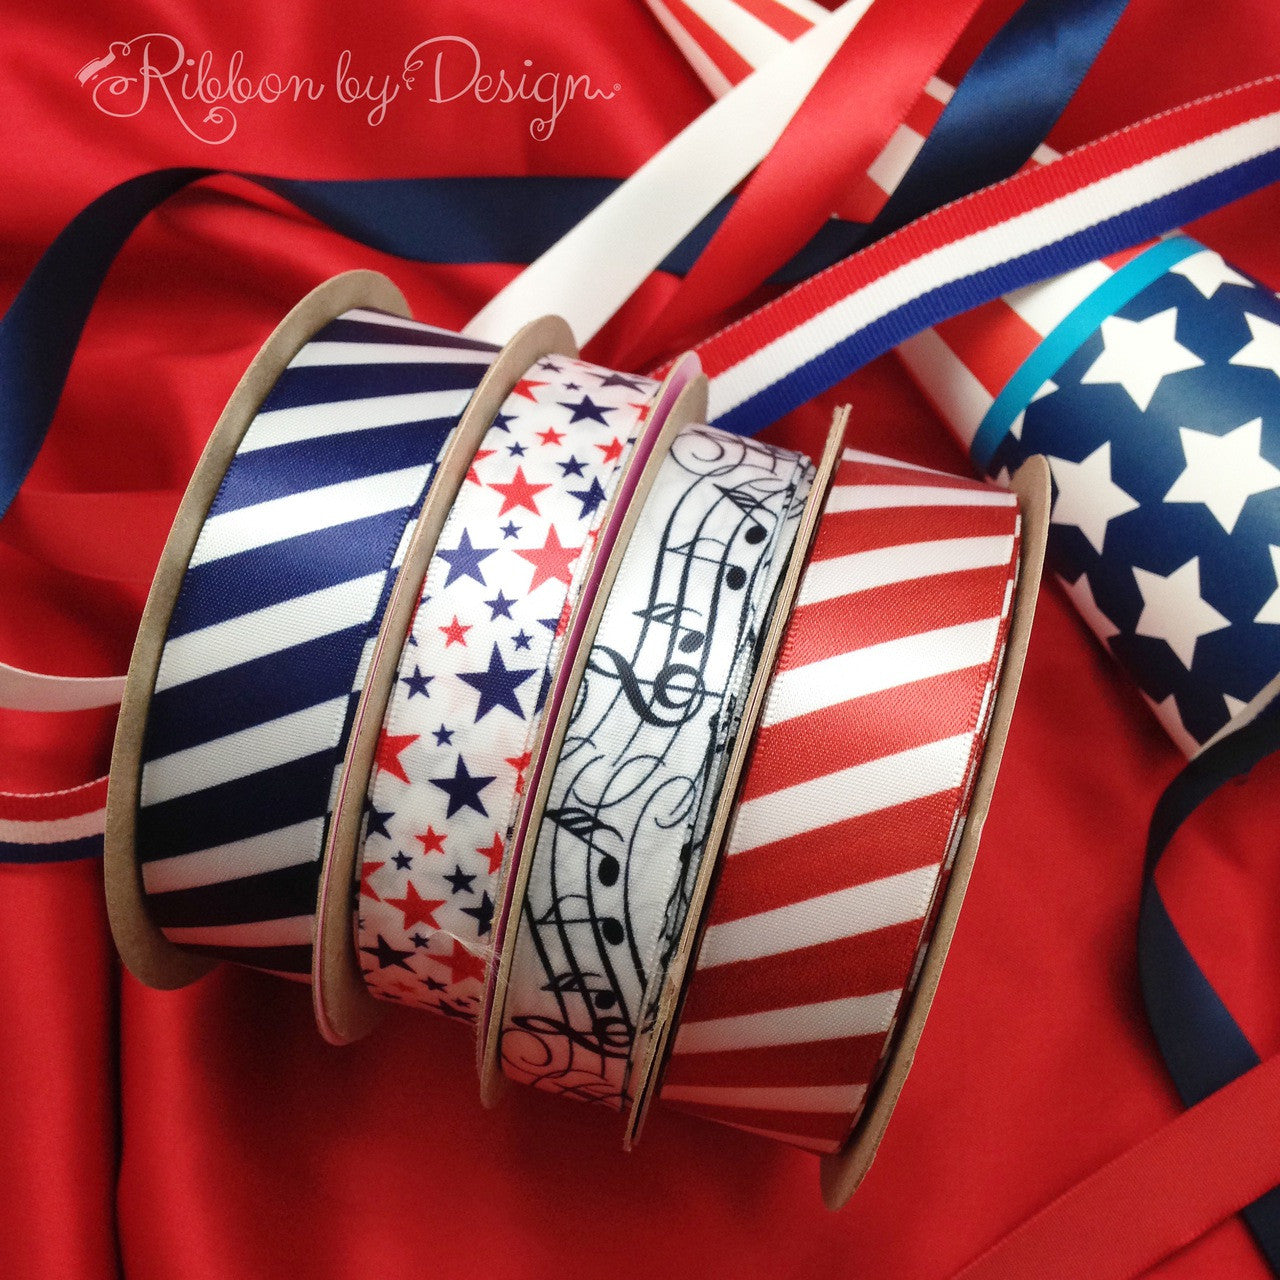 Our red and white stars pair beautifully with the stripes and musical notes to make the perfect patriotic party or 4th of July celebration!